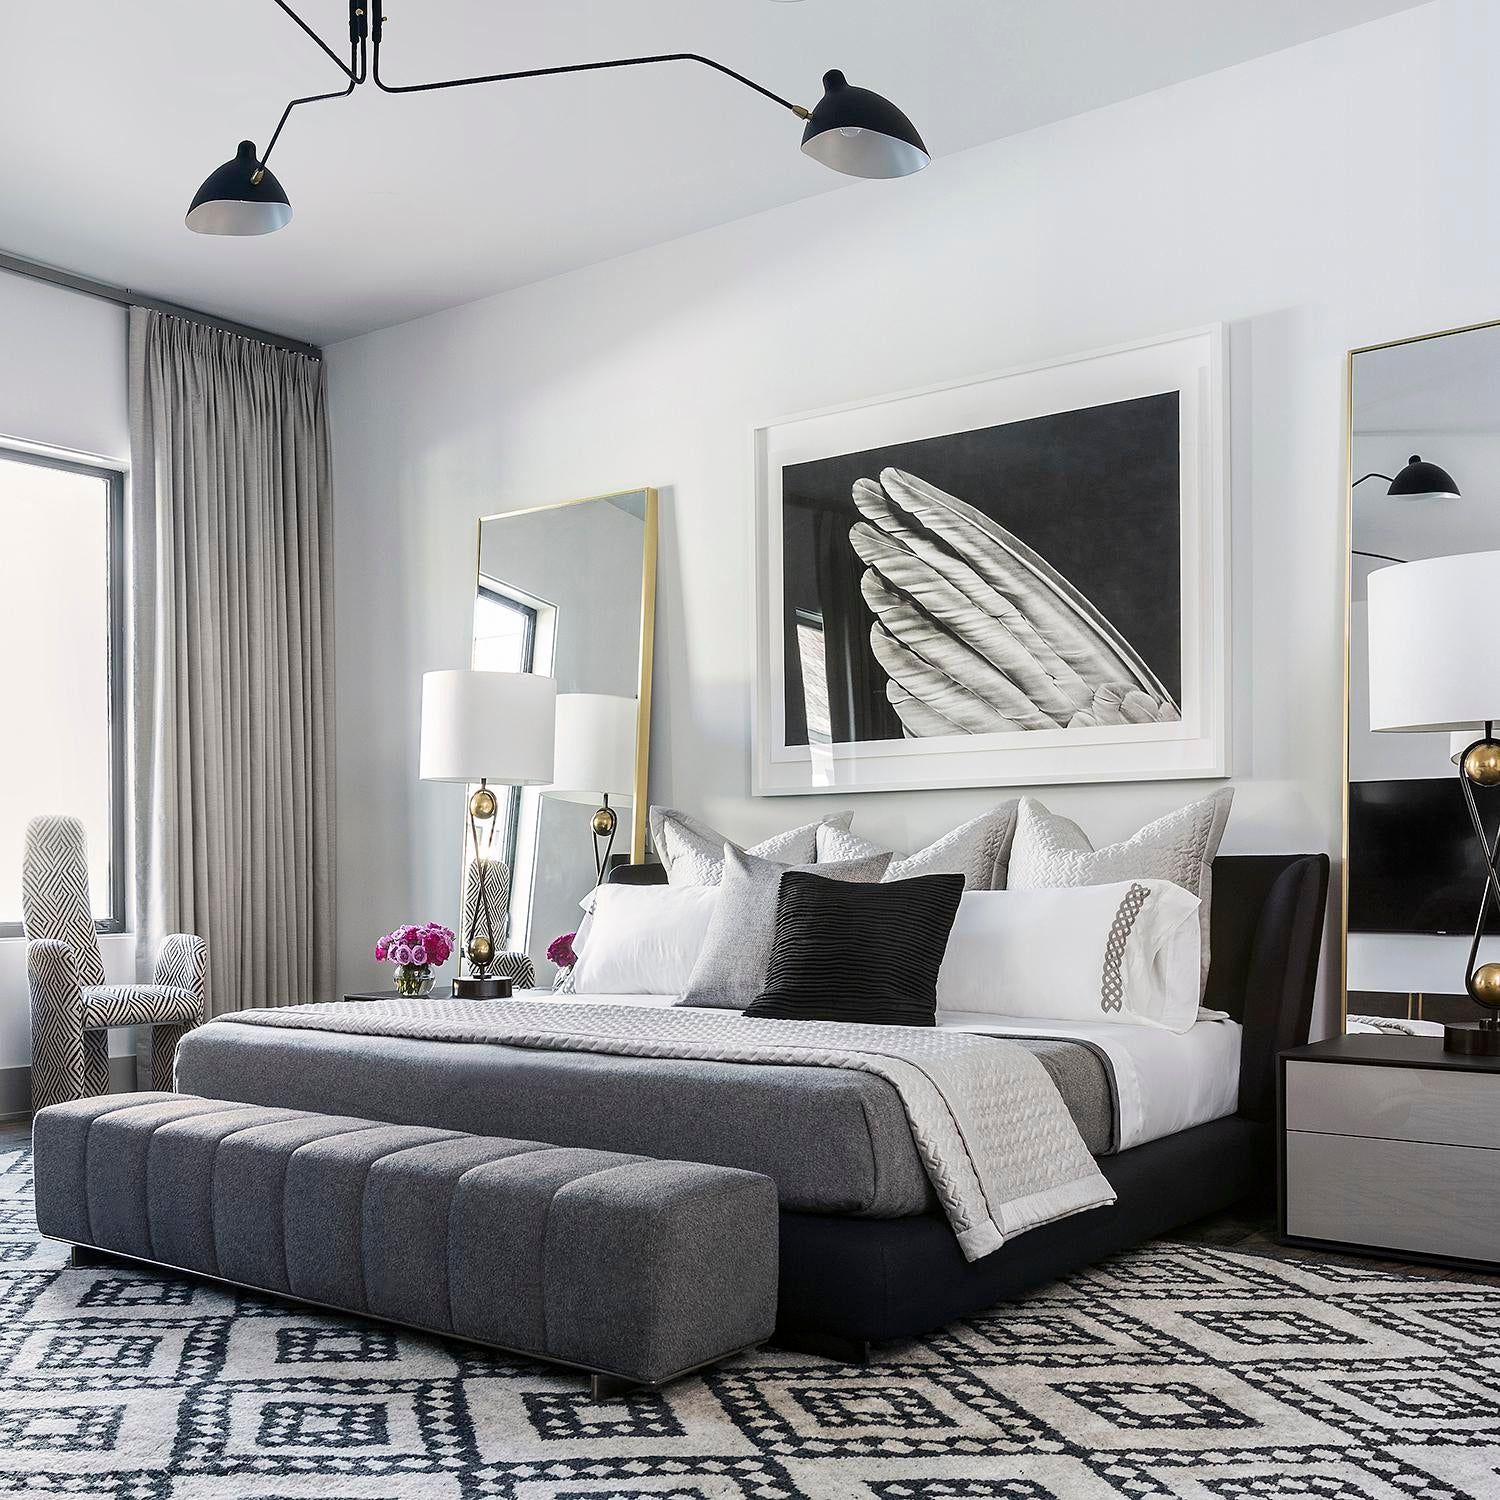 How to Decorate in Black and White